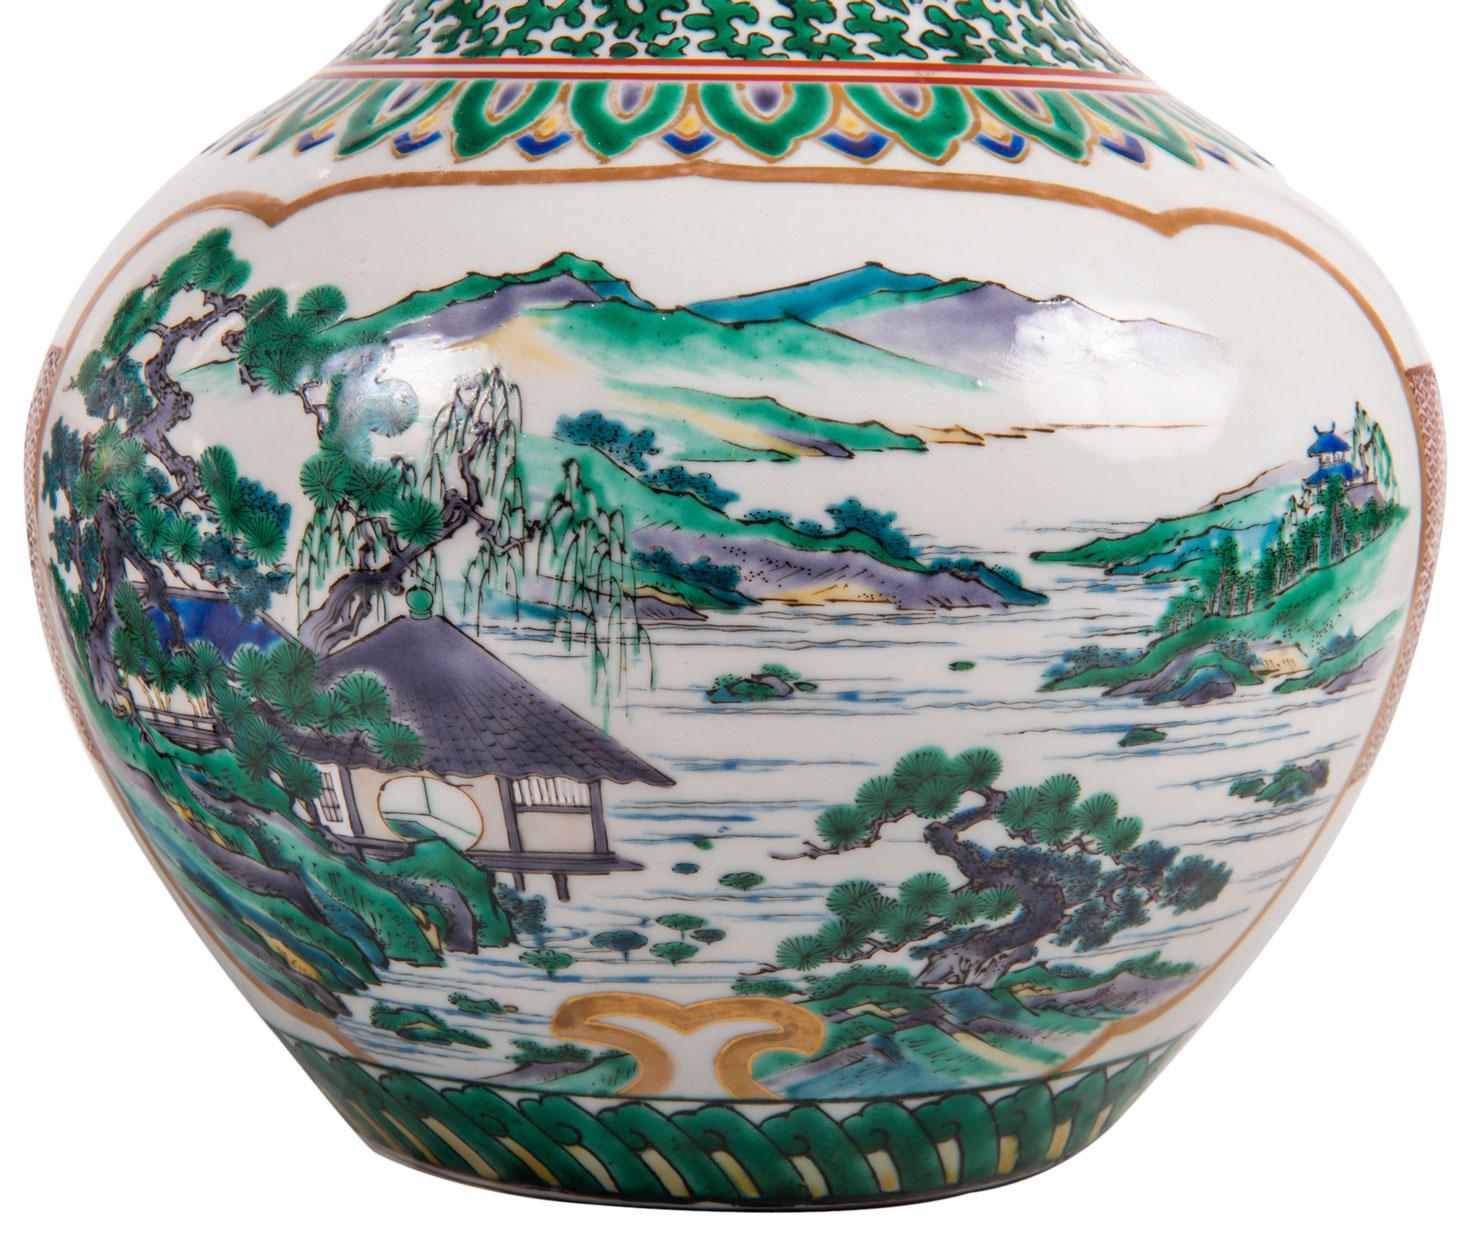 A good quality pair of late 19th century Japanese Kutani porcelain vases, each having green ground and gold motif decoration, inset panels depicting lake and mountainous scenes.